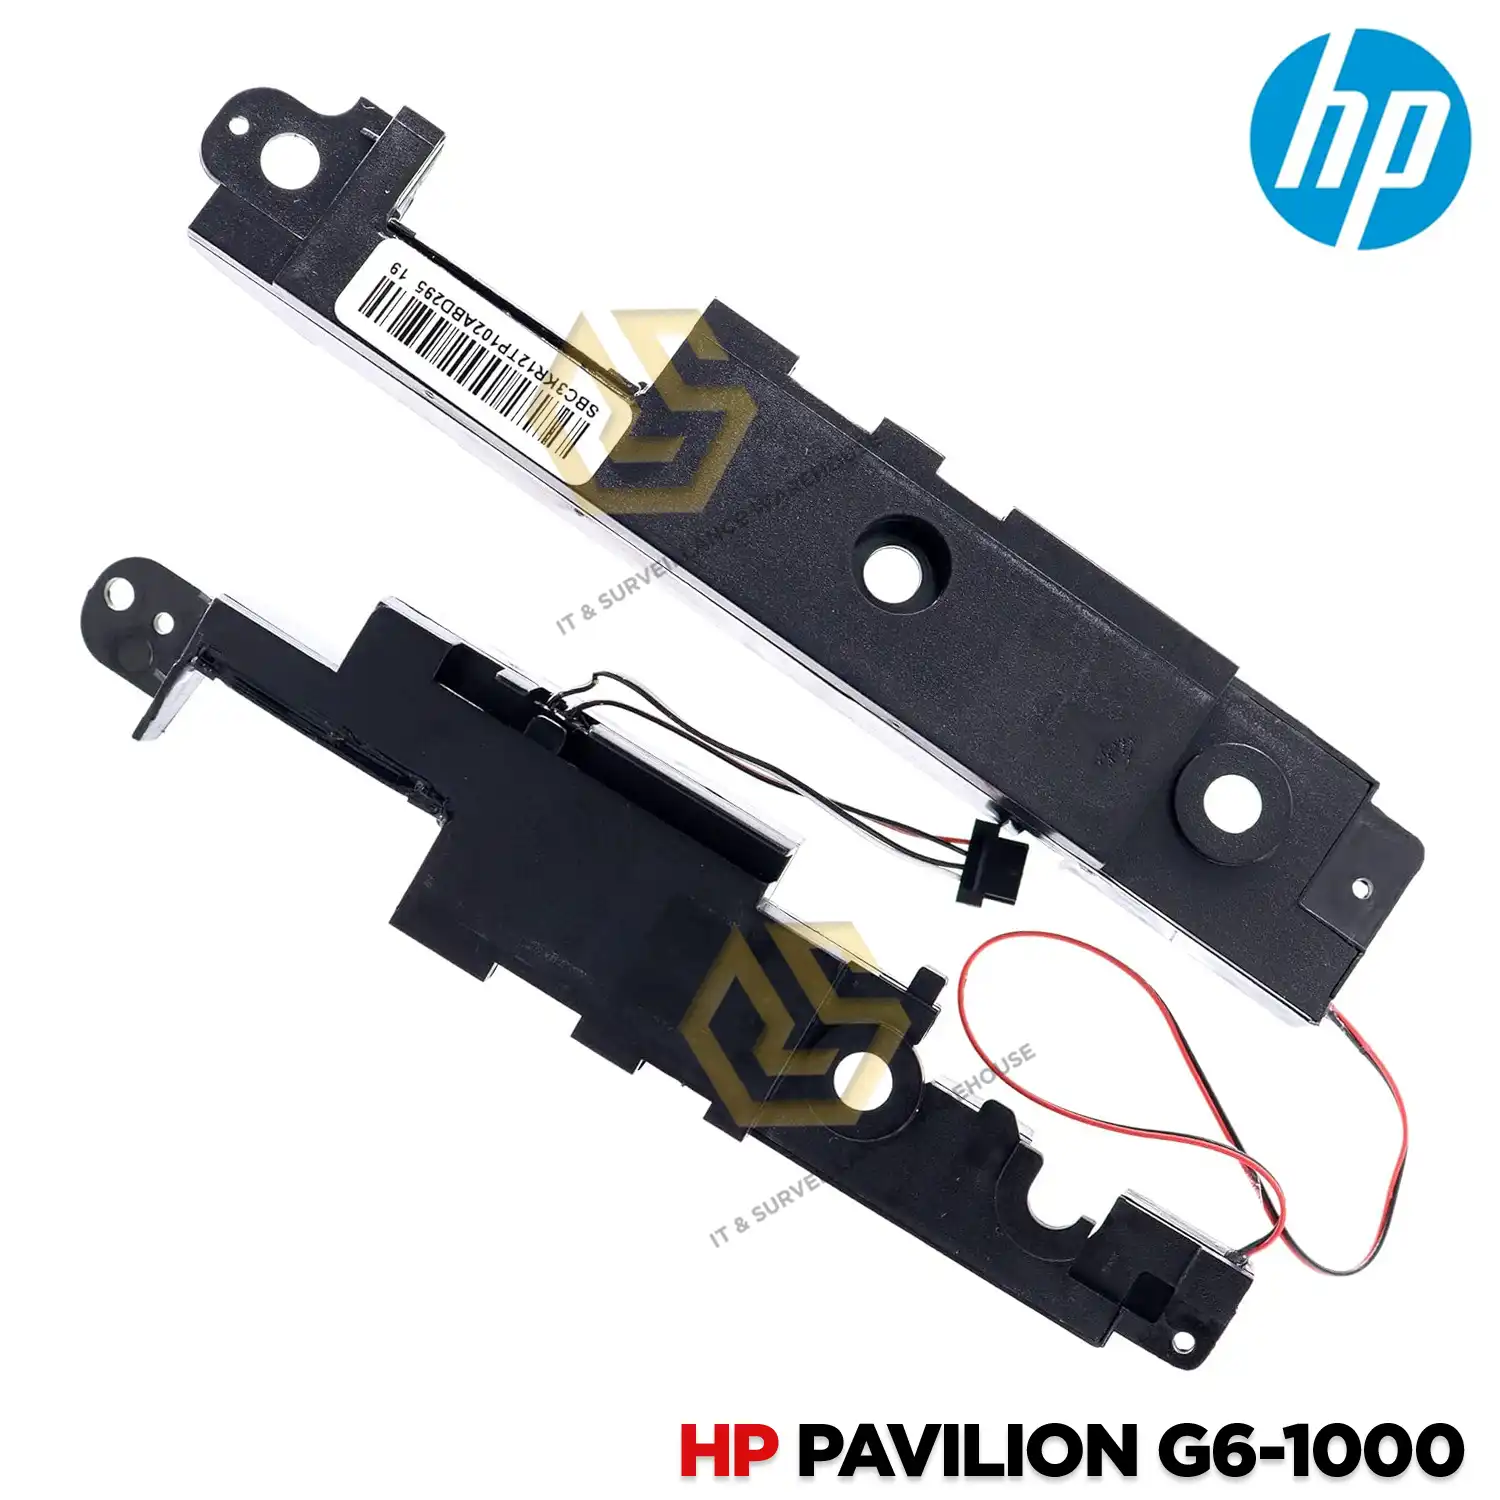 LAPTOP SPEAKERS FOR HP G6-1000